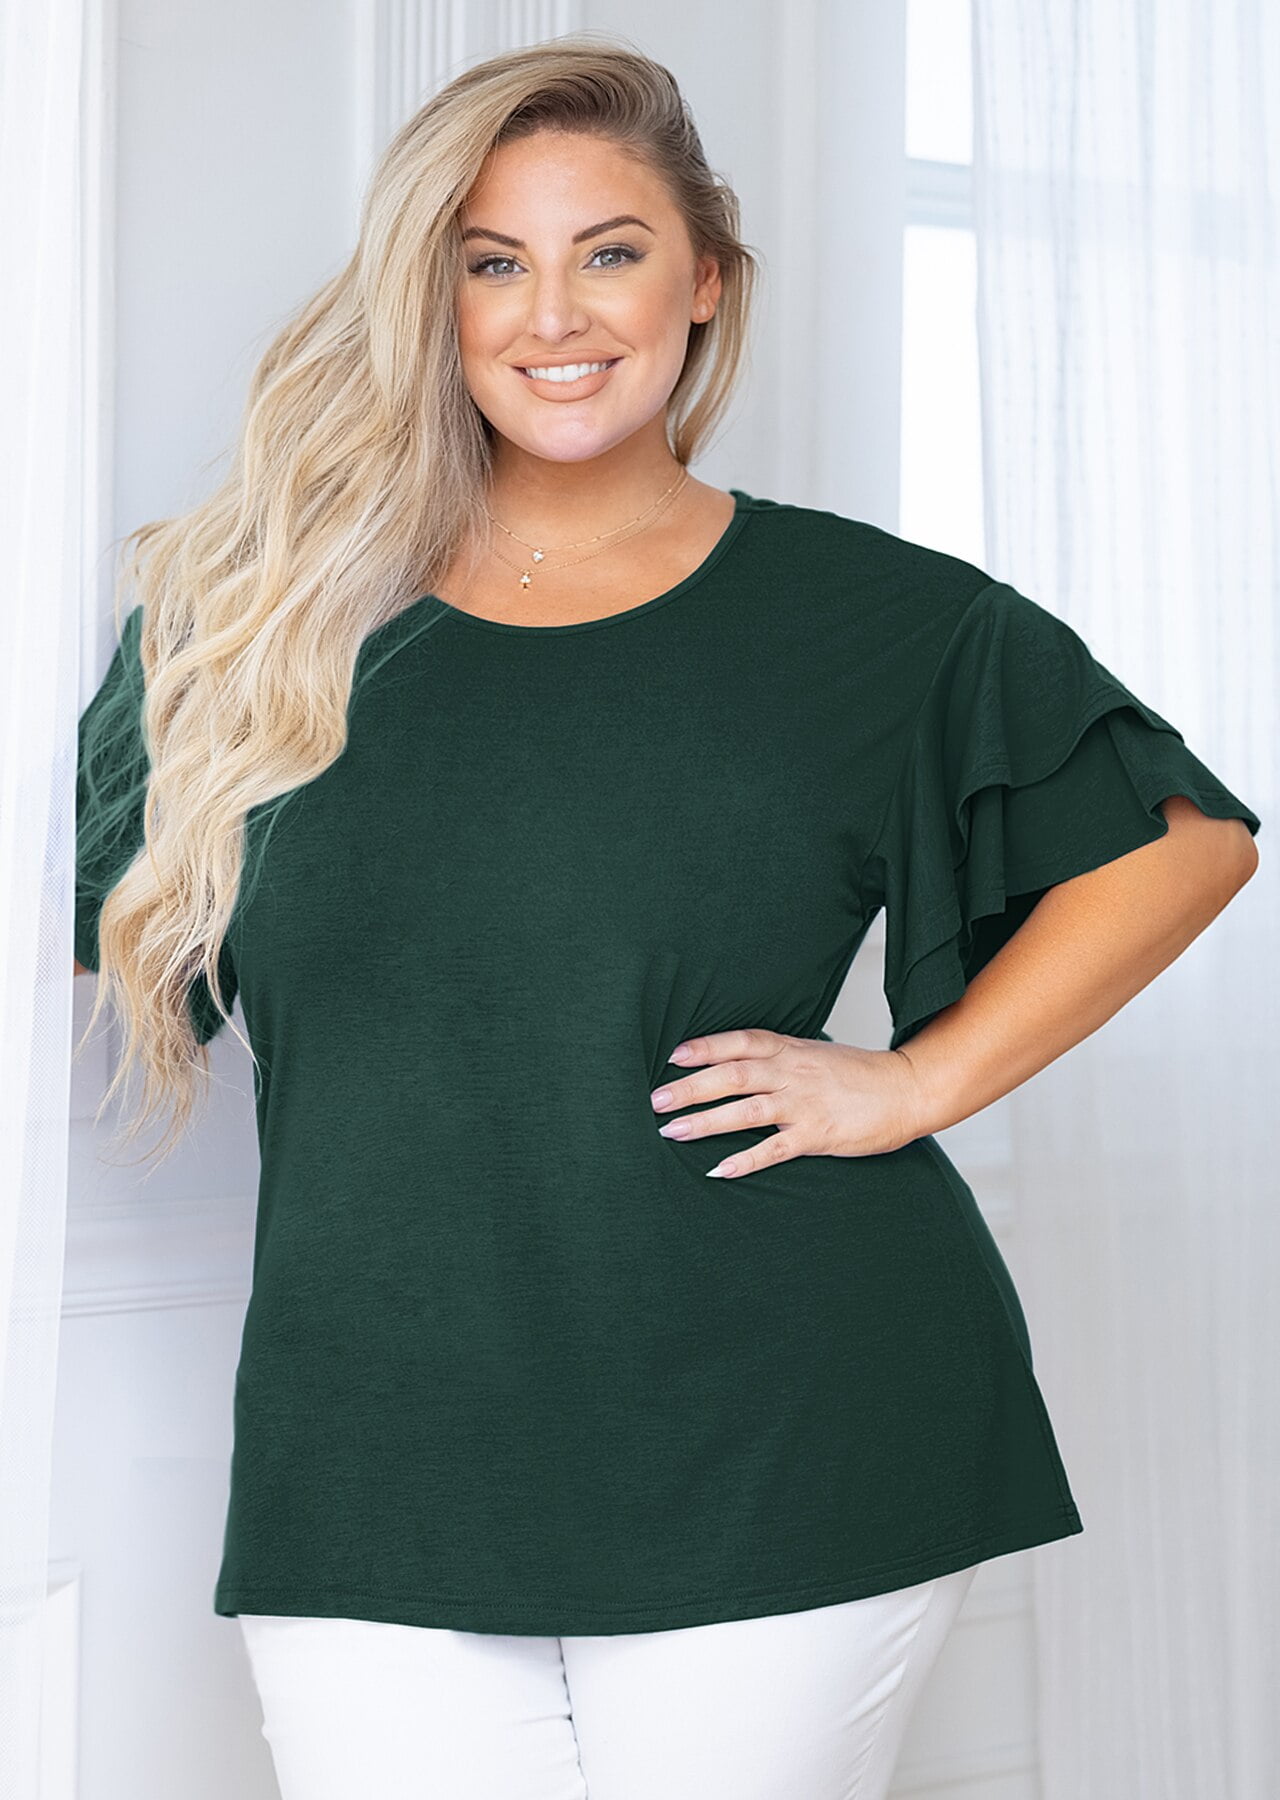 SHOWMALL Plus Size Shirt for Women Dark Green 4X Crewneck Double Ruffle  Short Sleeve Tunic Top Flowy Summer Loose Fitting Clothing 